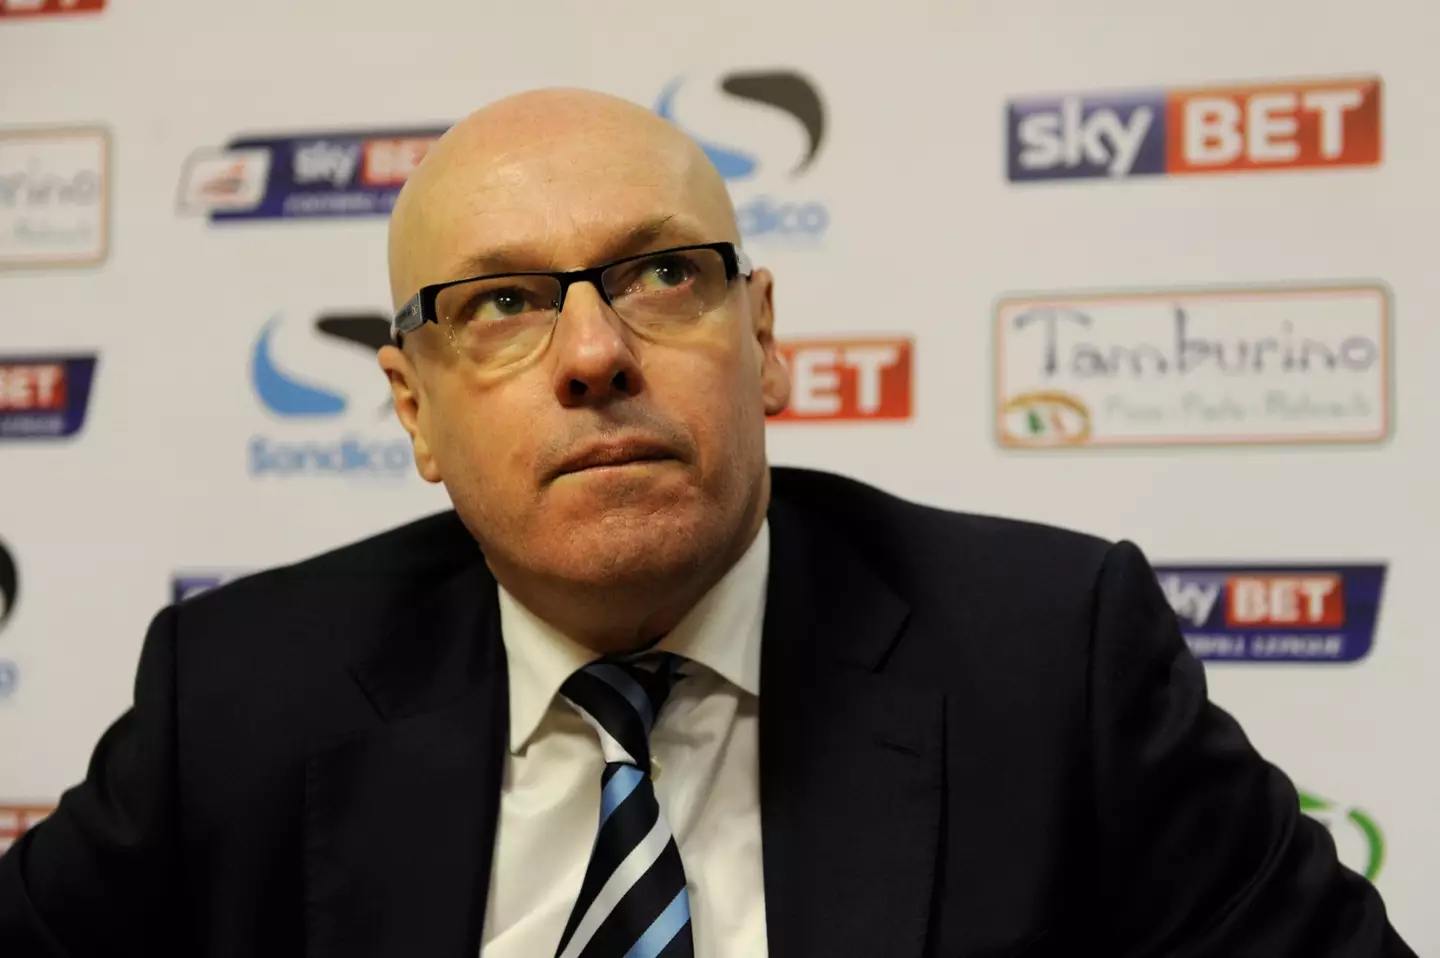 McDermott lost his job as Leeds United manager. (Image